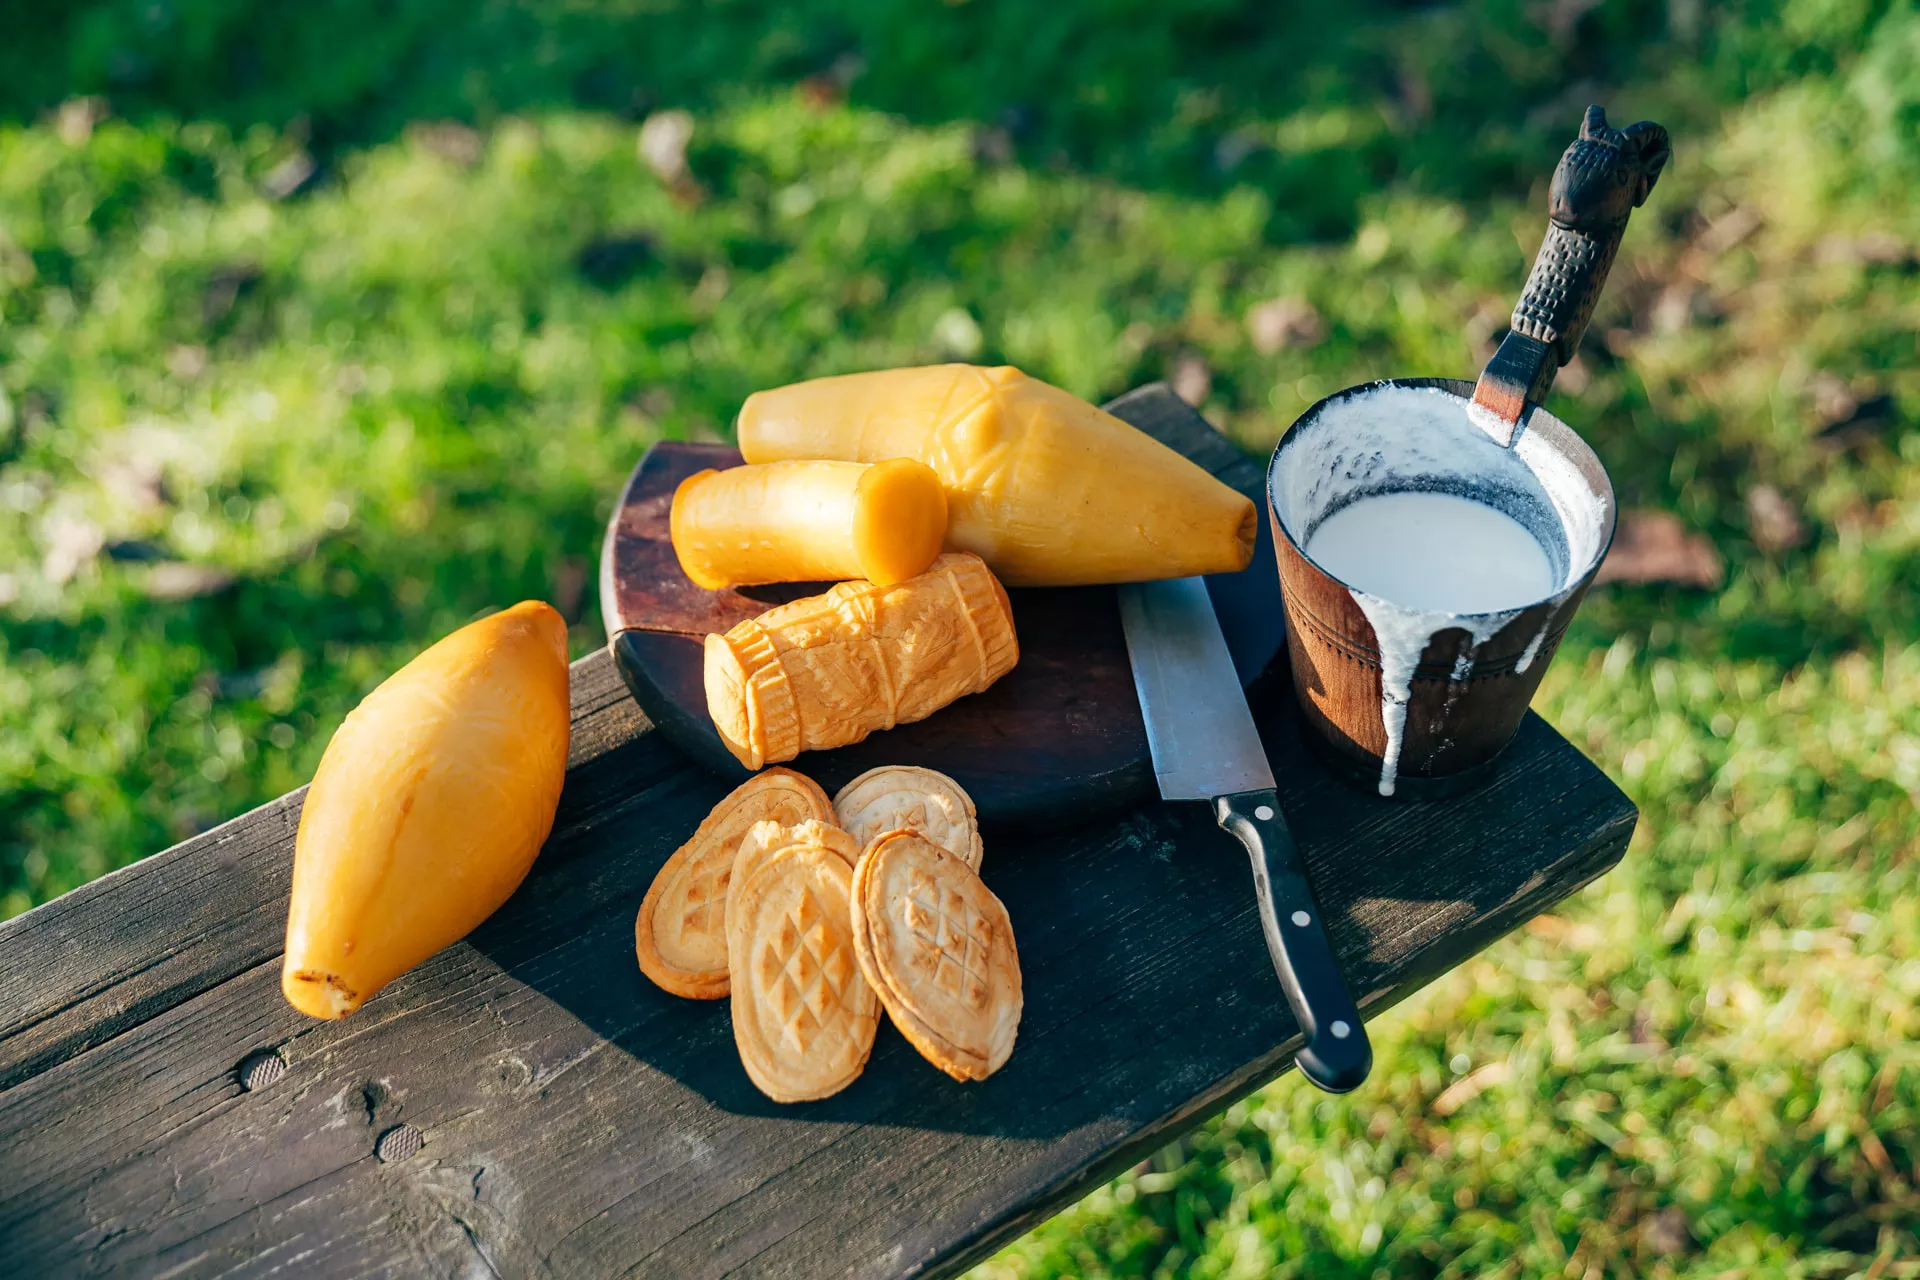 Oscypek, Gołka and other mountain cheeses of different shapes on a wooden bench, with a knife and a wooden pitcher with Żentyca sheep milk whey.